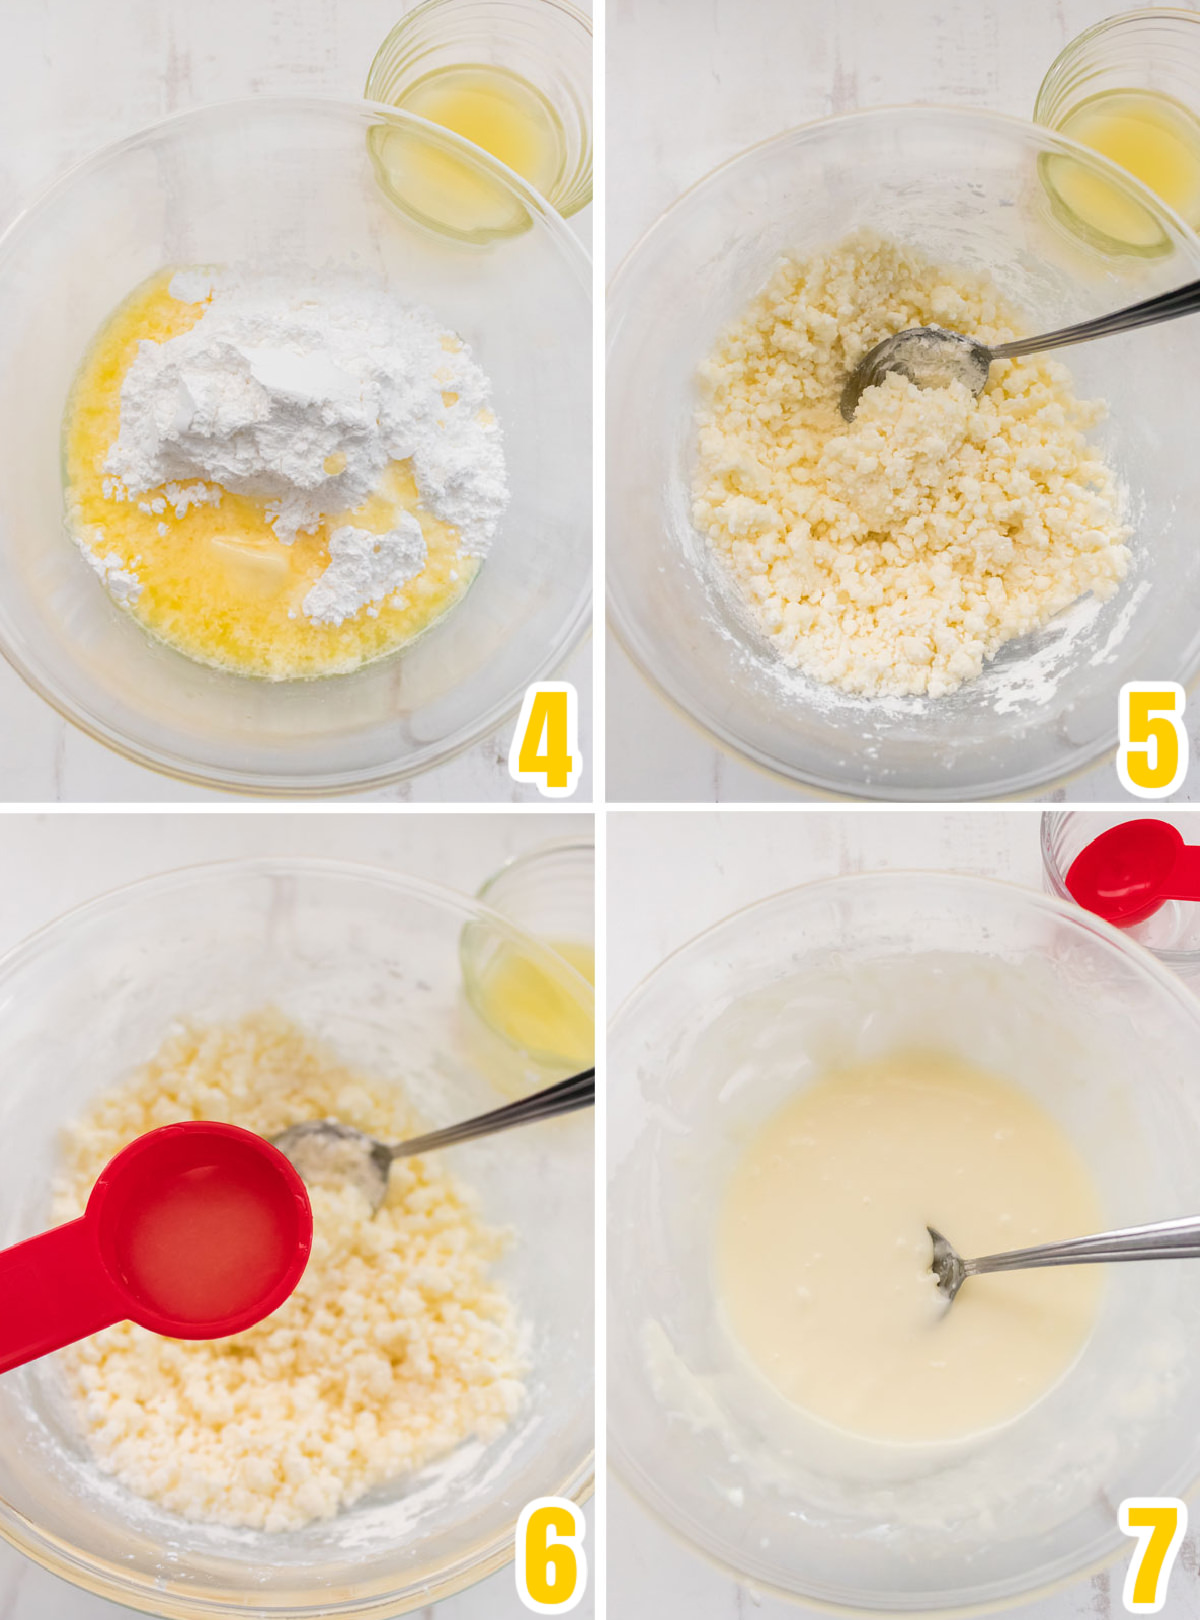 Collage image showing how to make the homemade Lemon Icing.